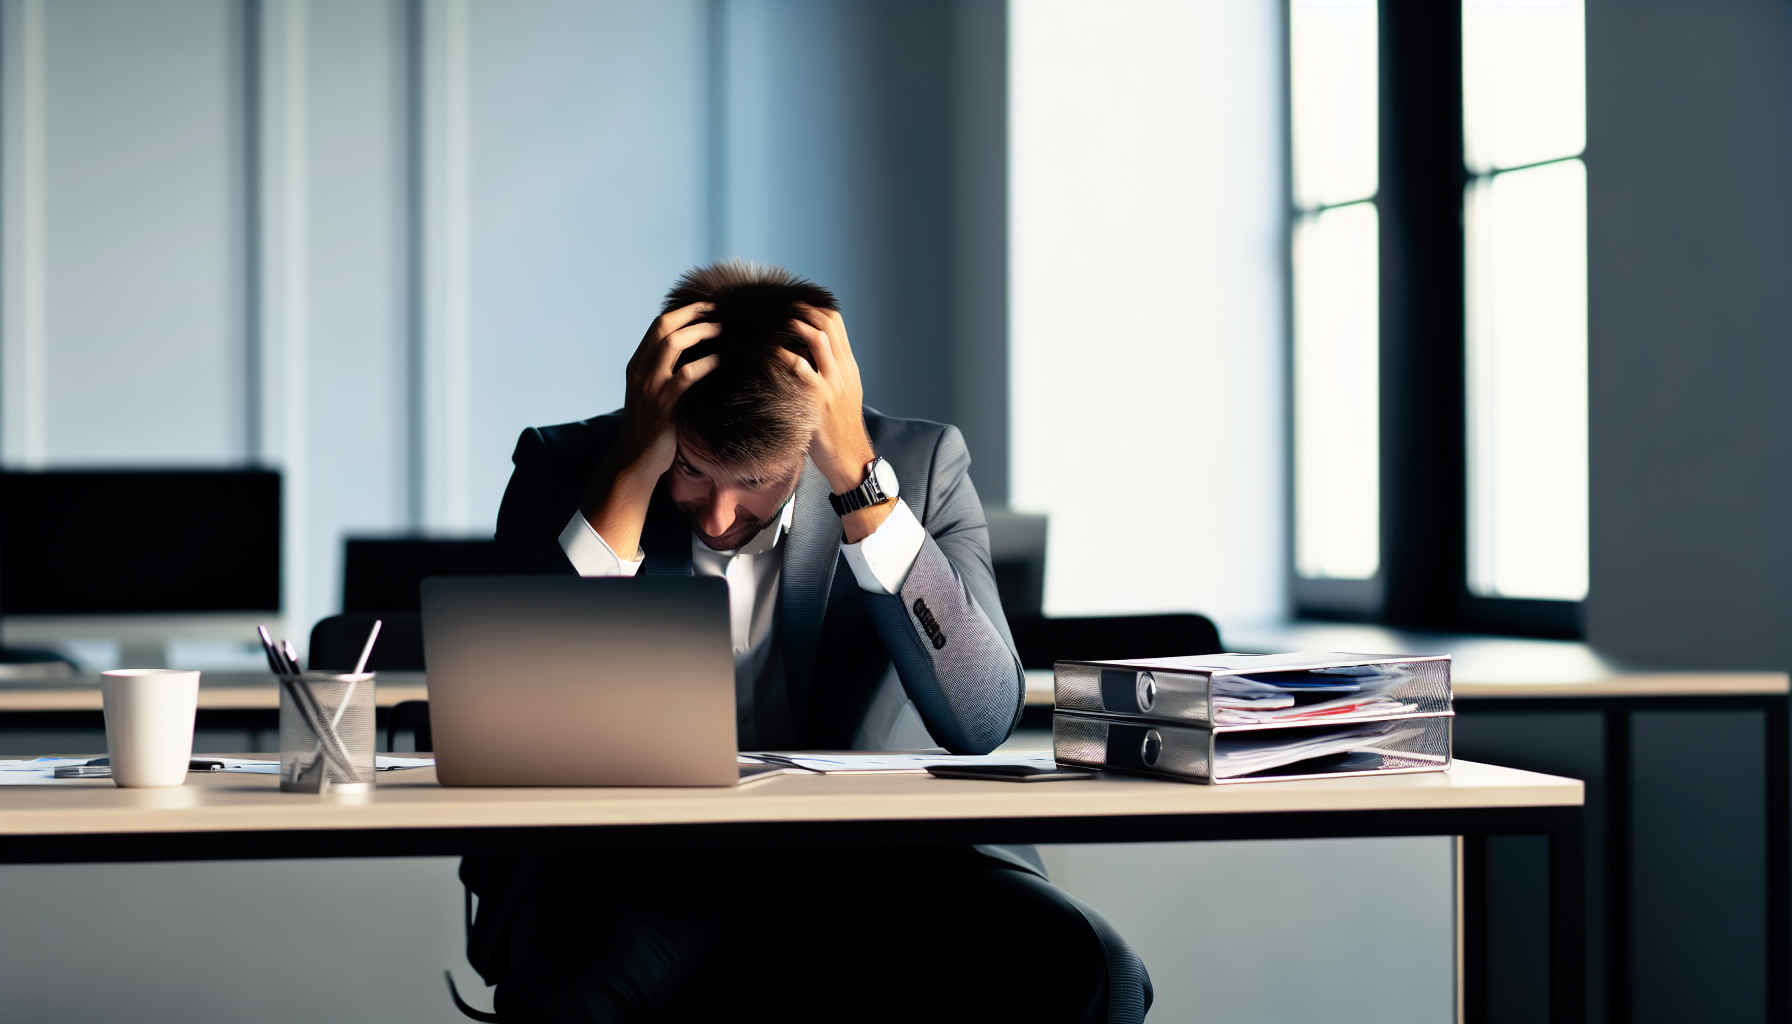 Stressed employee sitting at a desk with head in hands